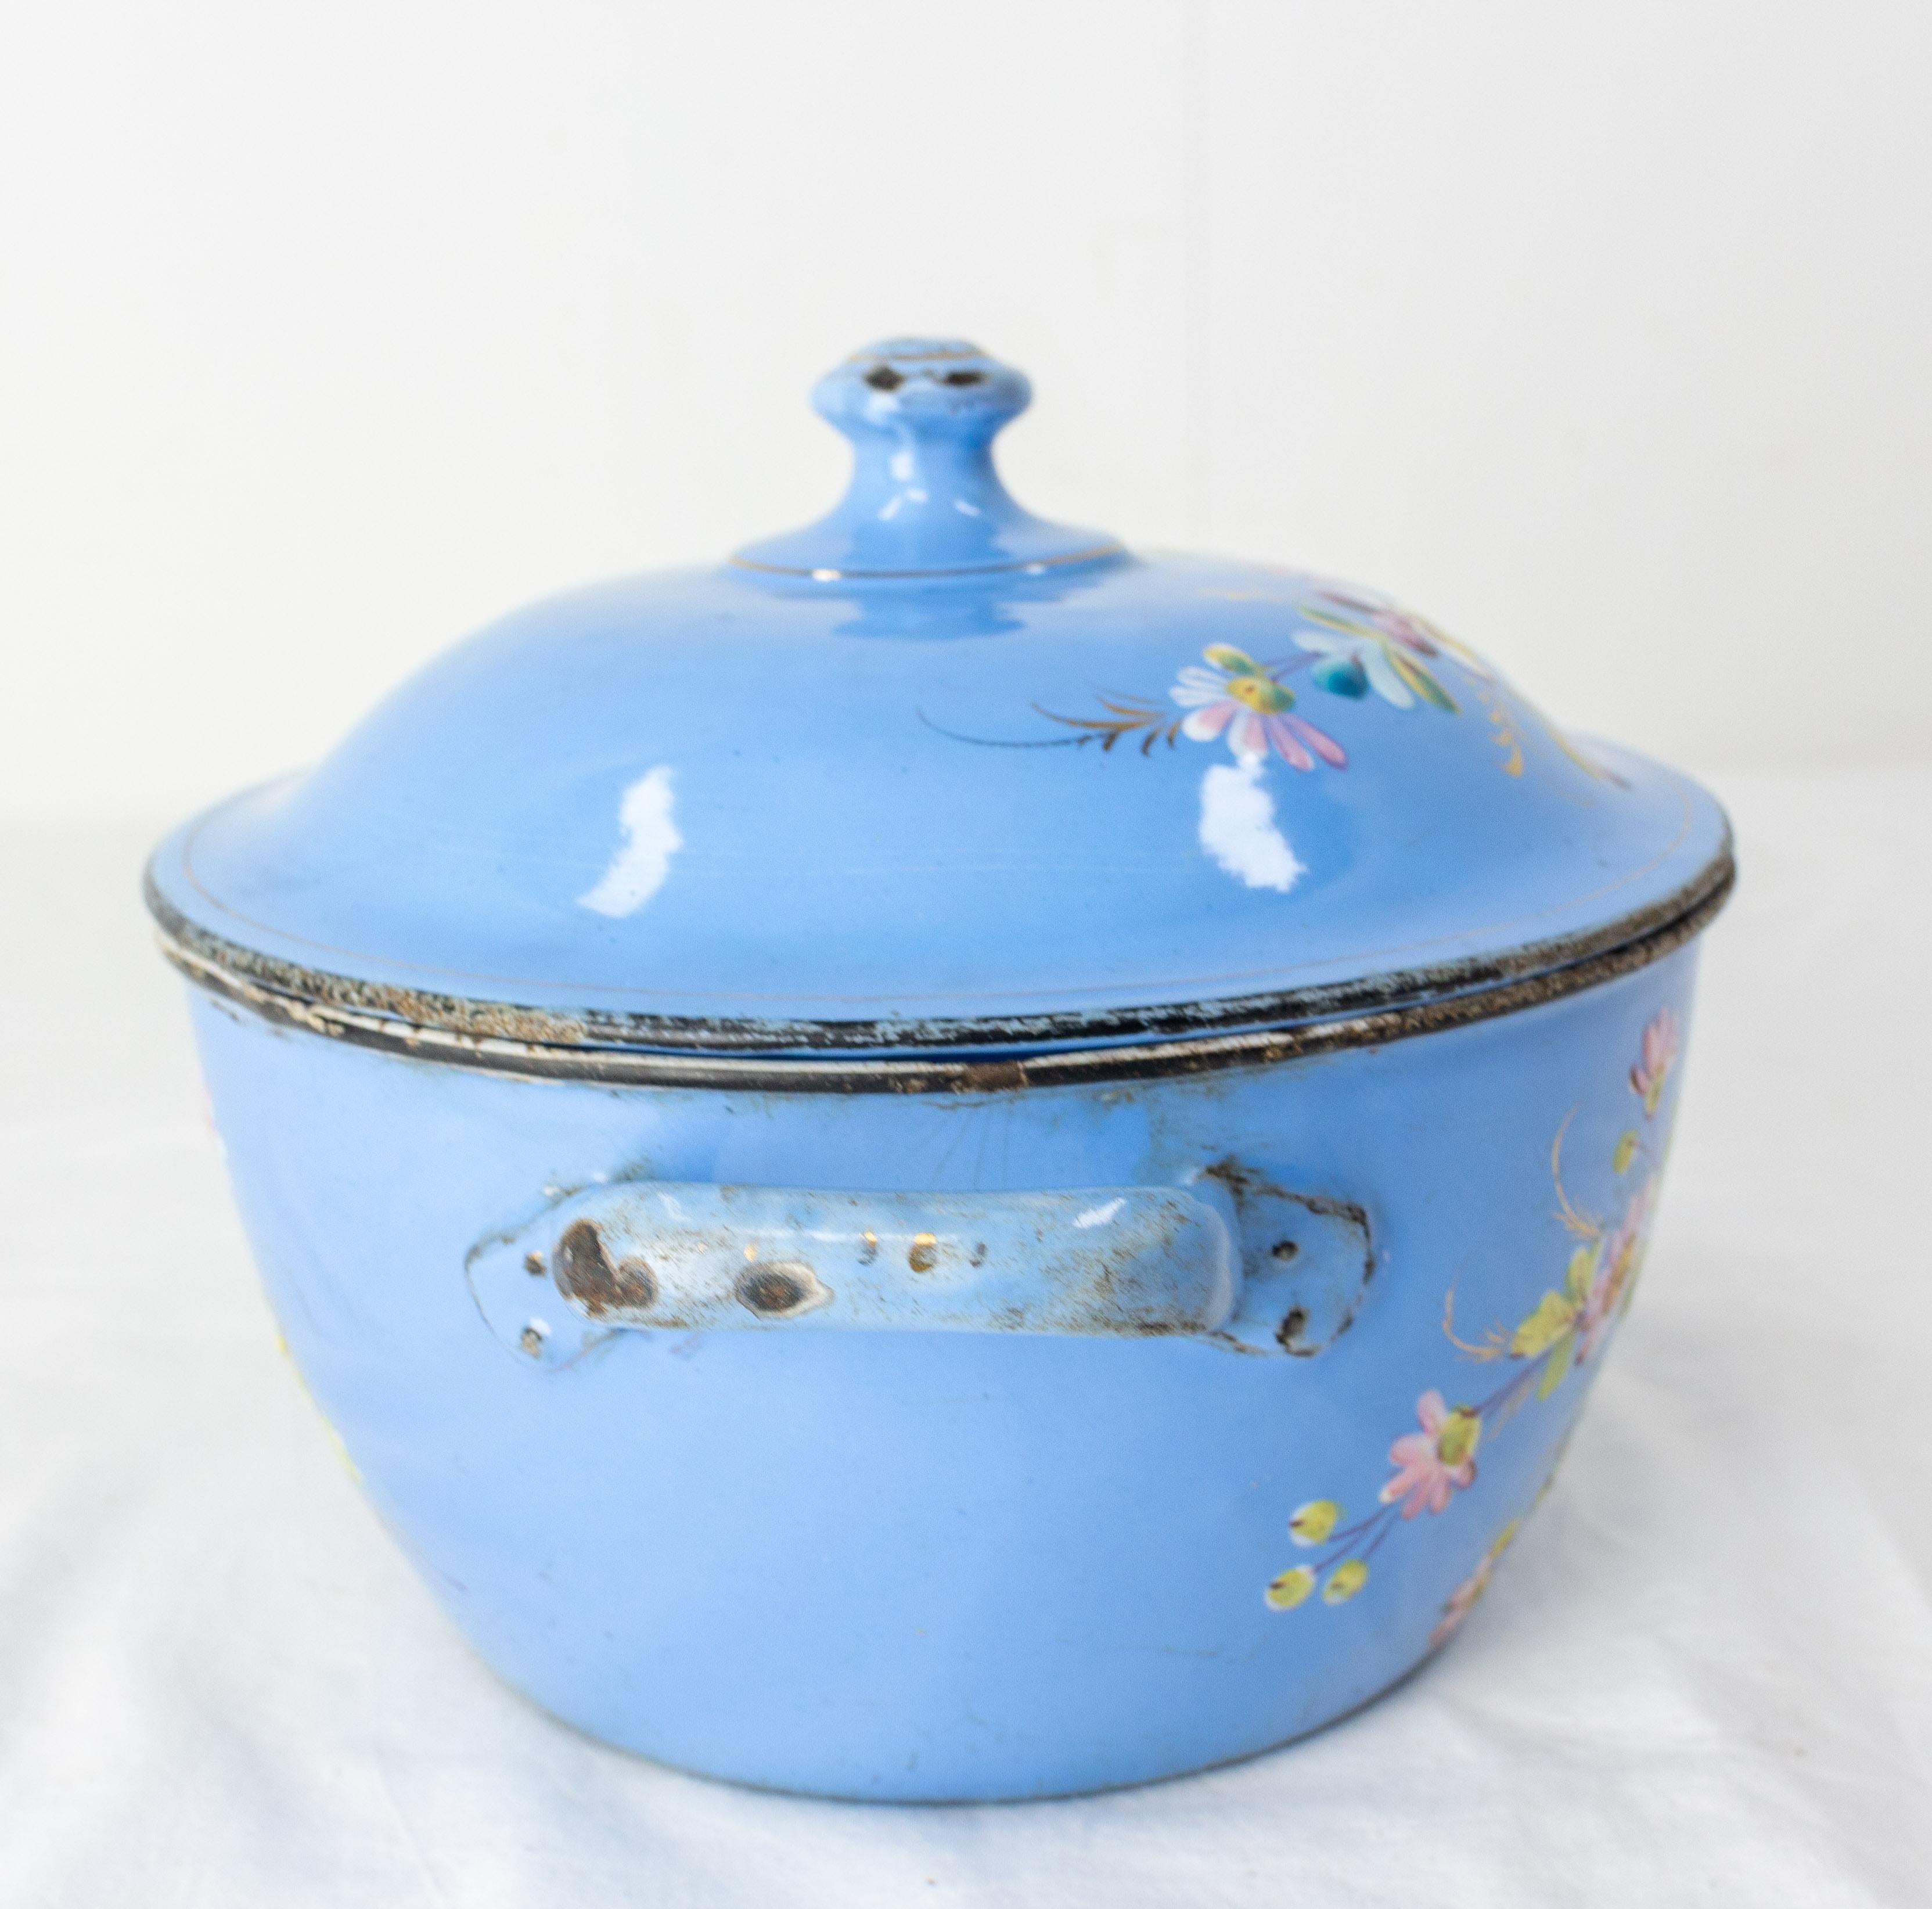 French Country Blue Soup Tureen with Floral Decoration, Enameled Iron, C. 1900 For Sale 1